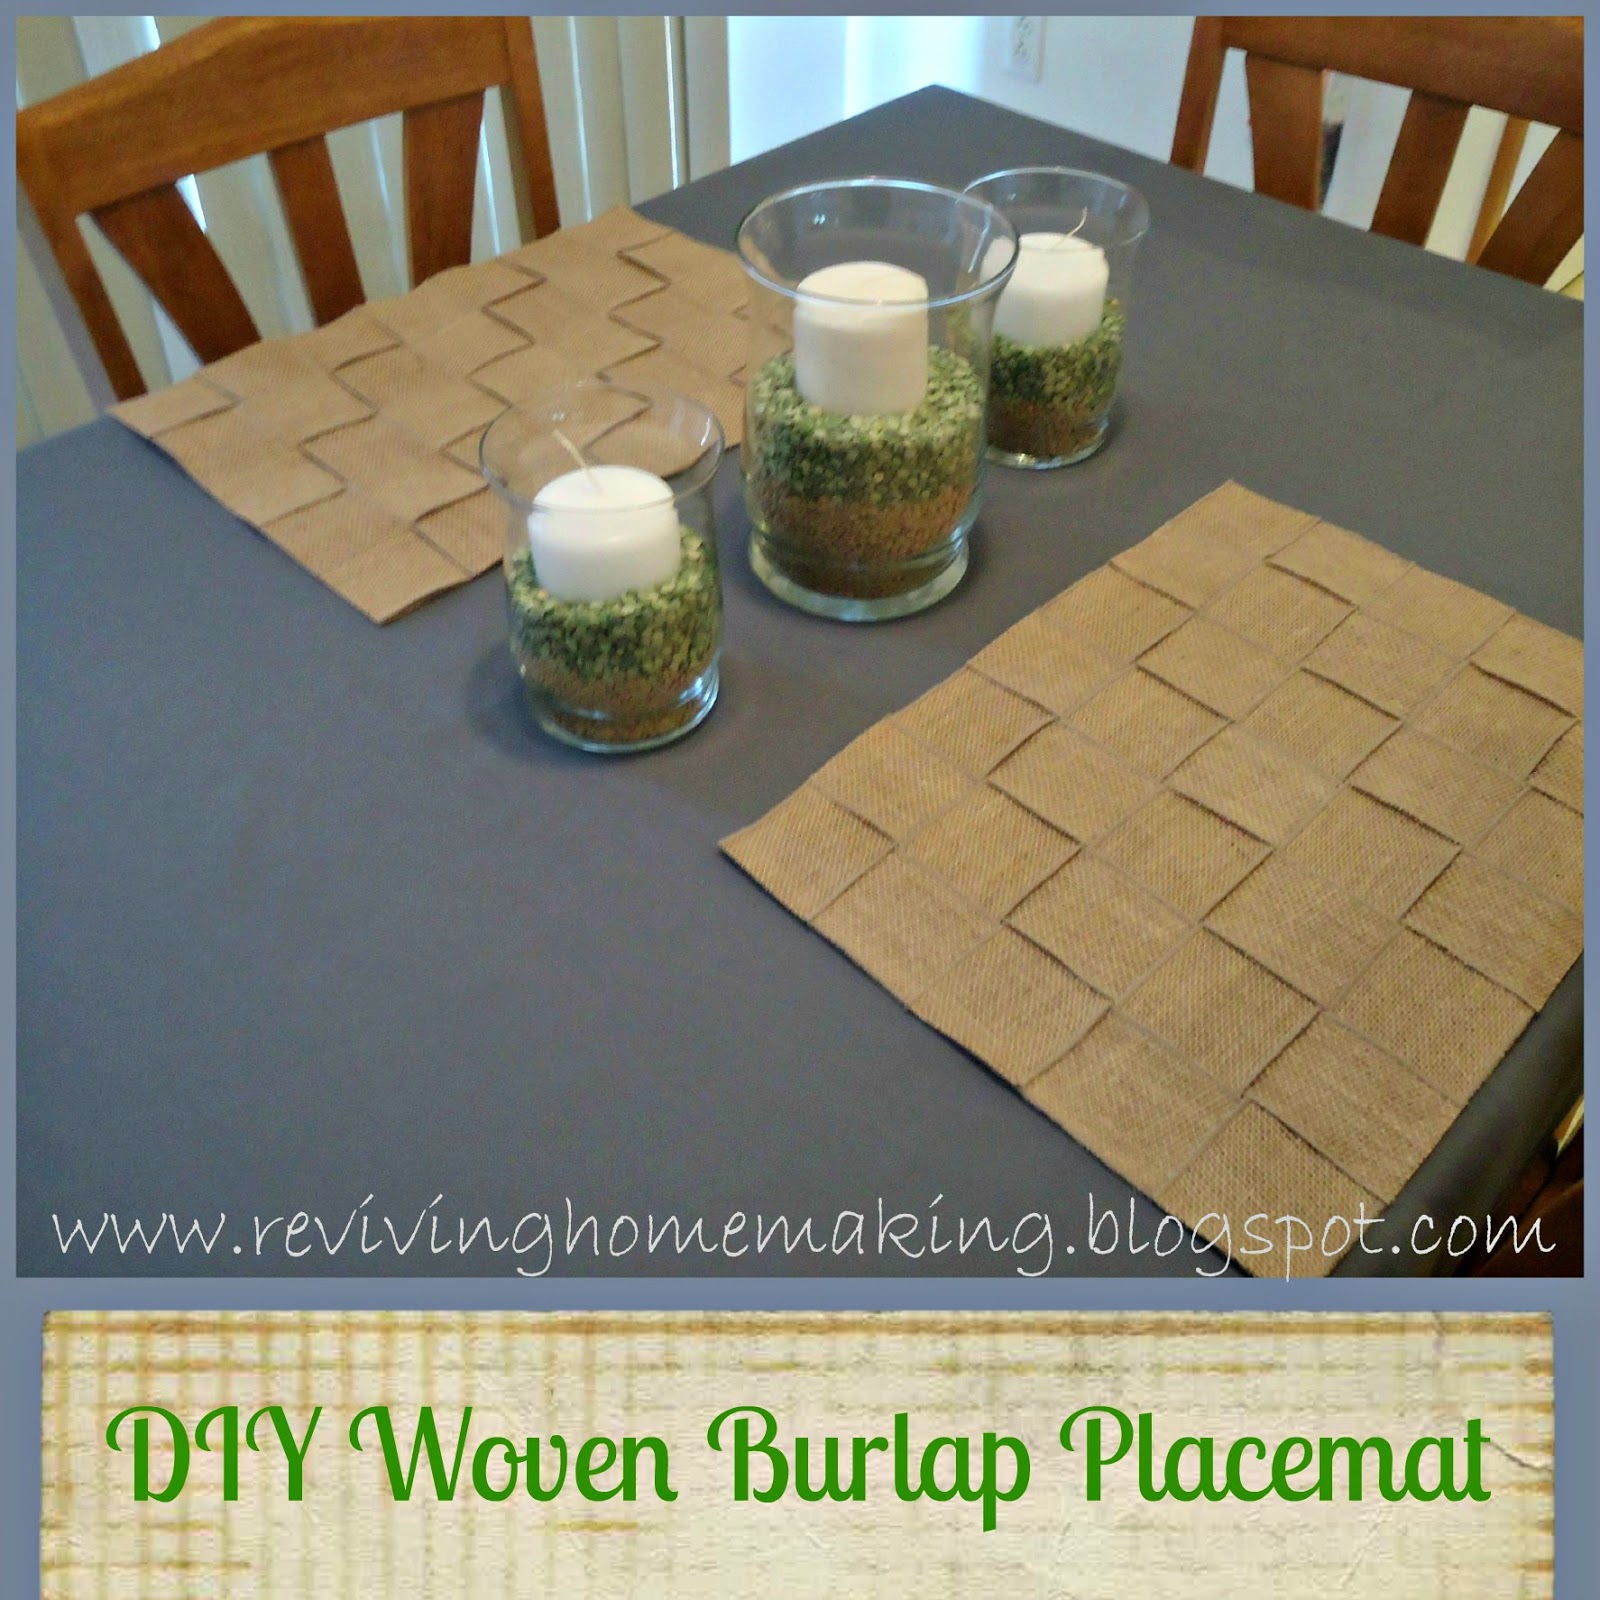 How to Make DIY Placemats from Burlap with a No Sew Method